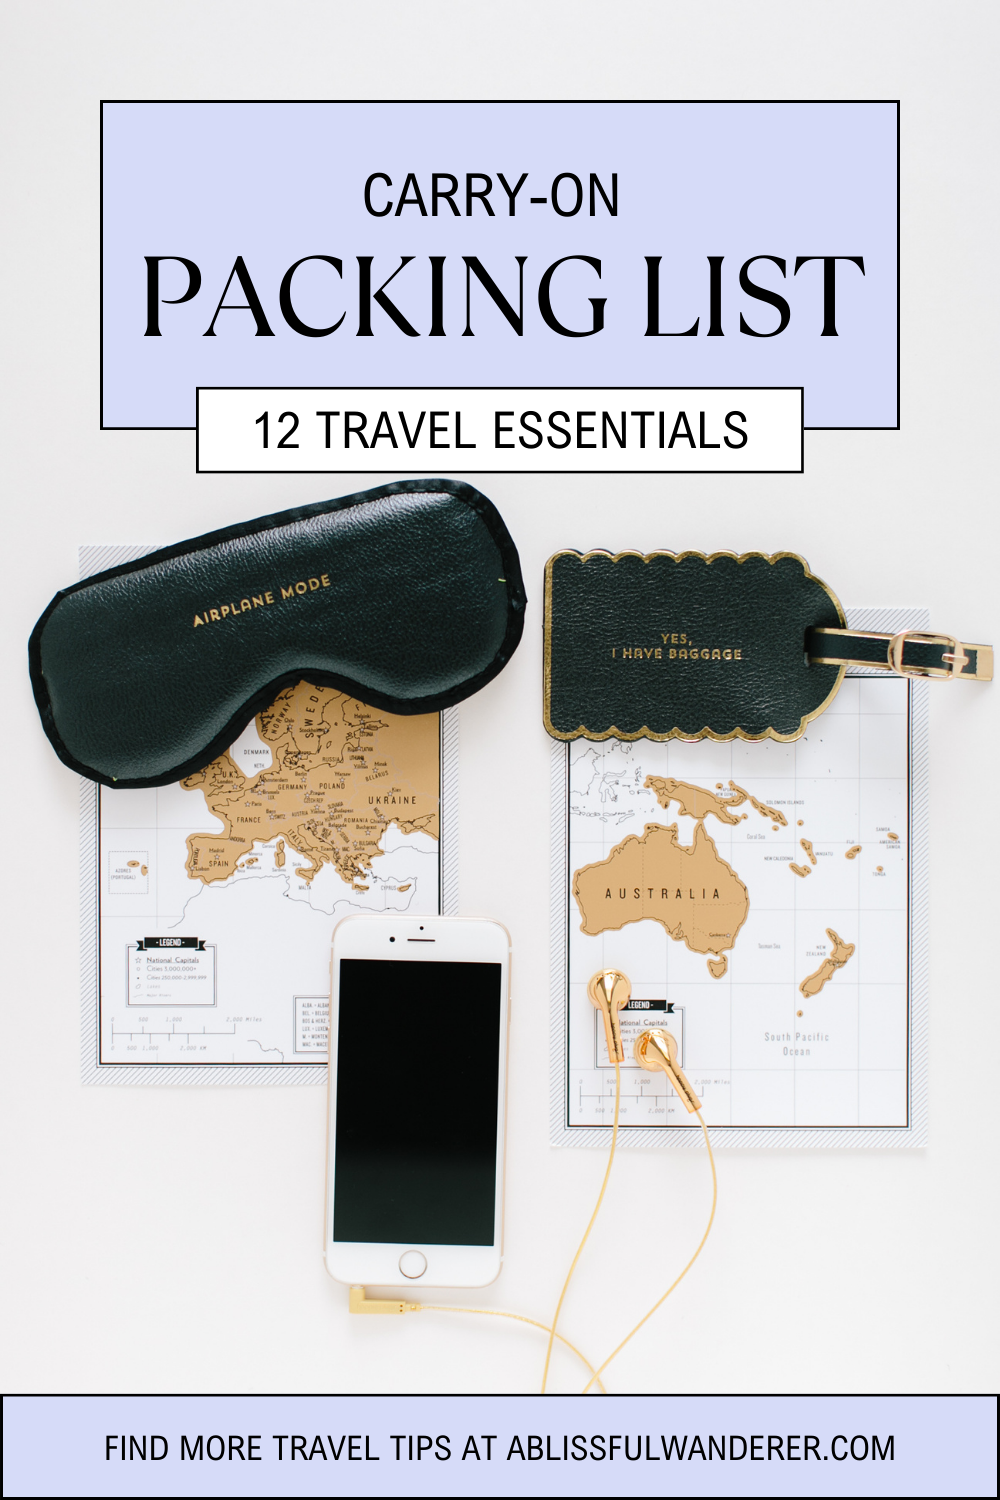 The Ultimate Carry On Packing List After 12 Years of Travel